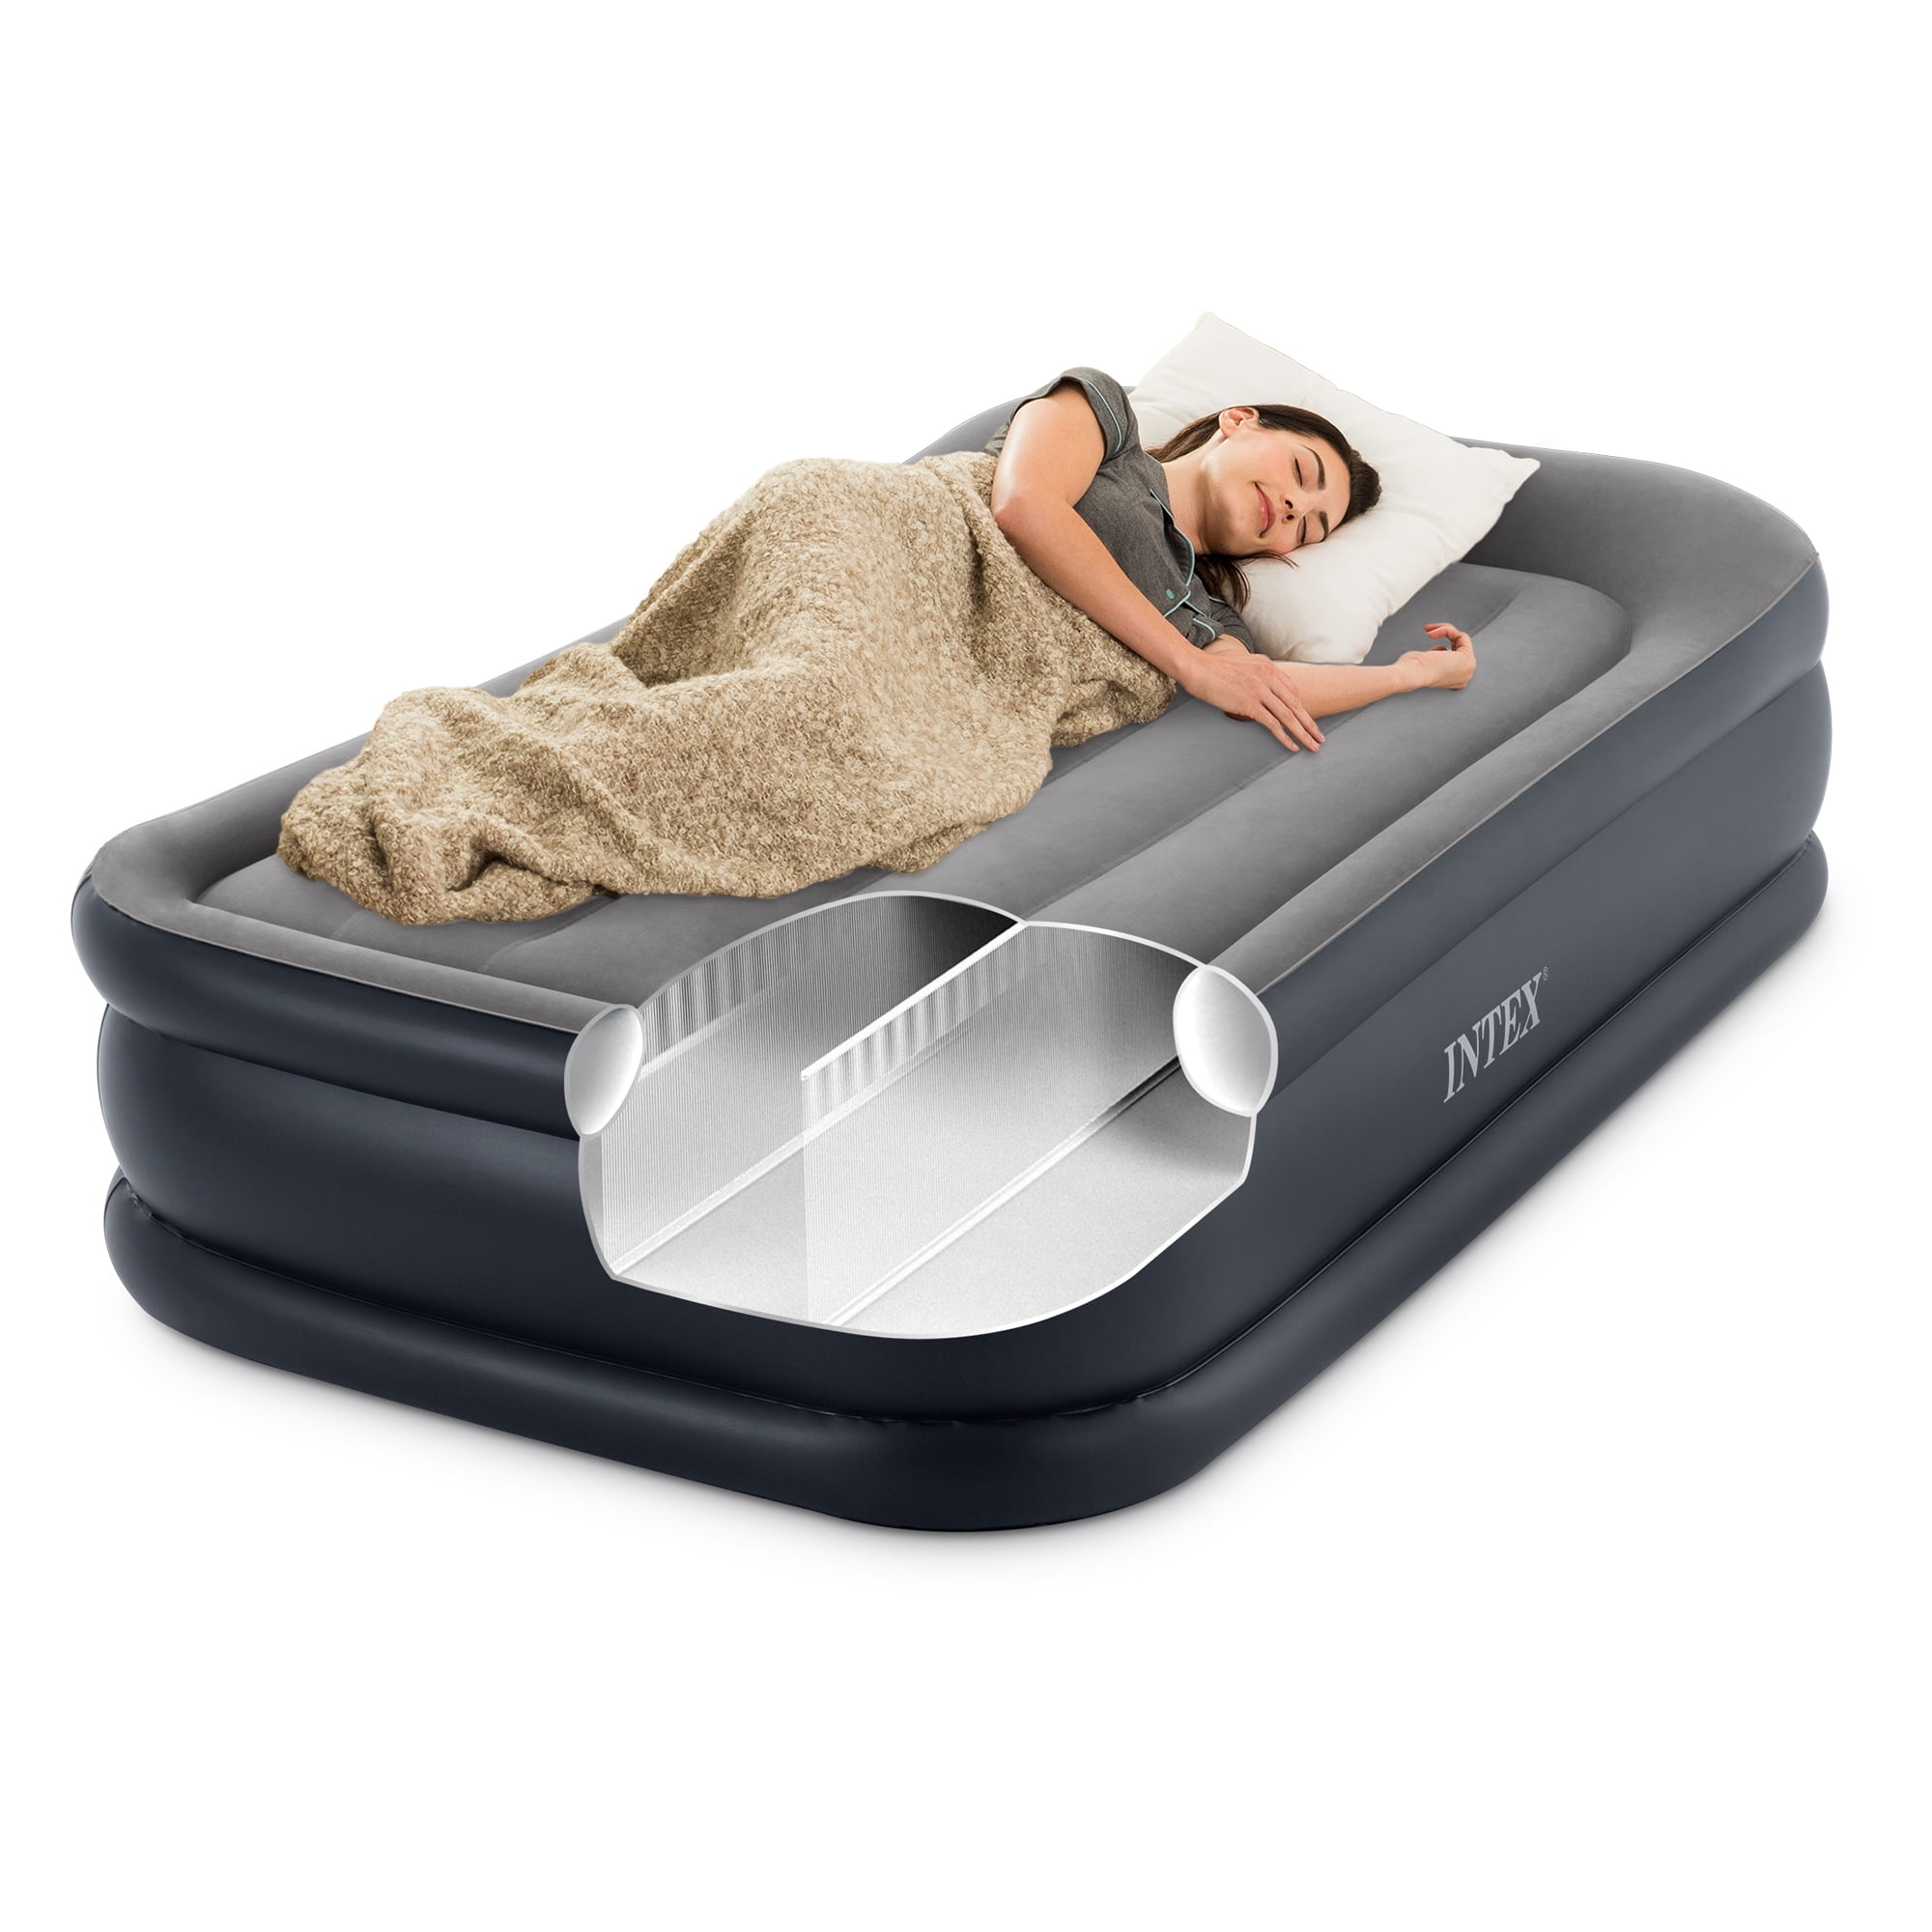 Intex 64131EP Dura-Beam Pillow Rest Raised Airbed Twin Size with Built in Pump for sale online 